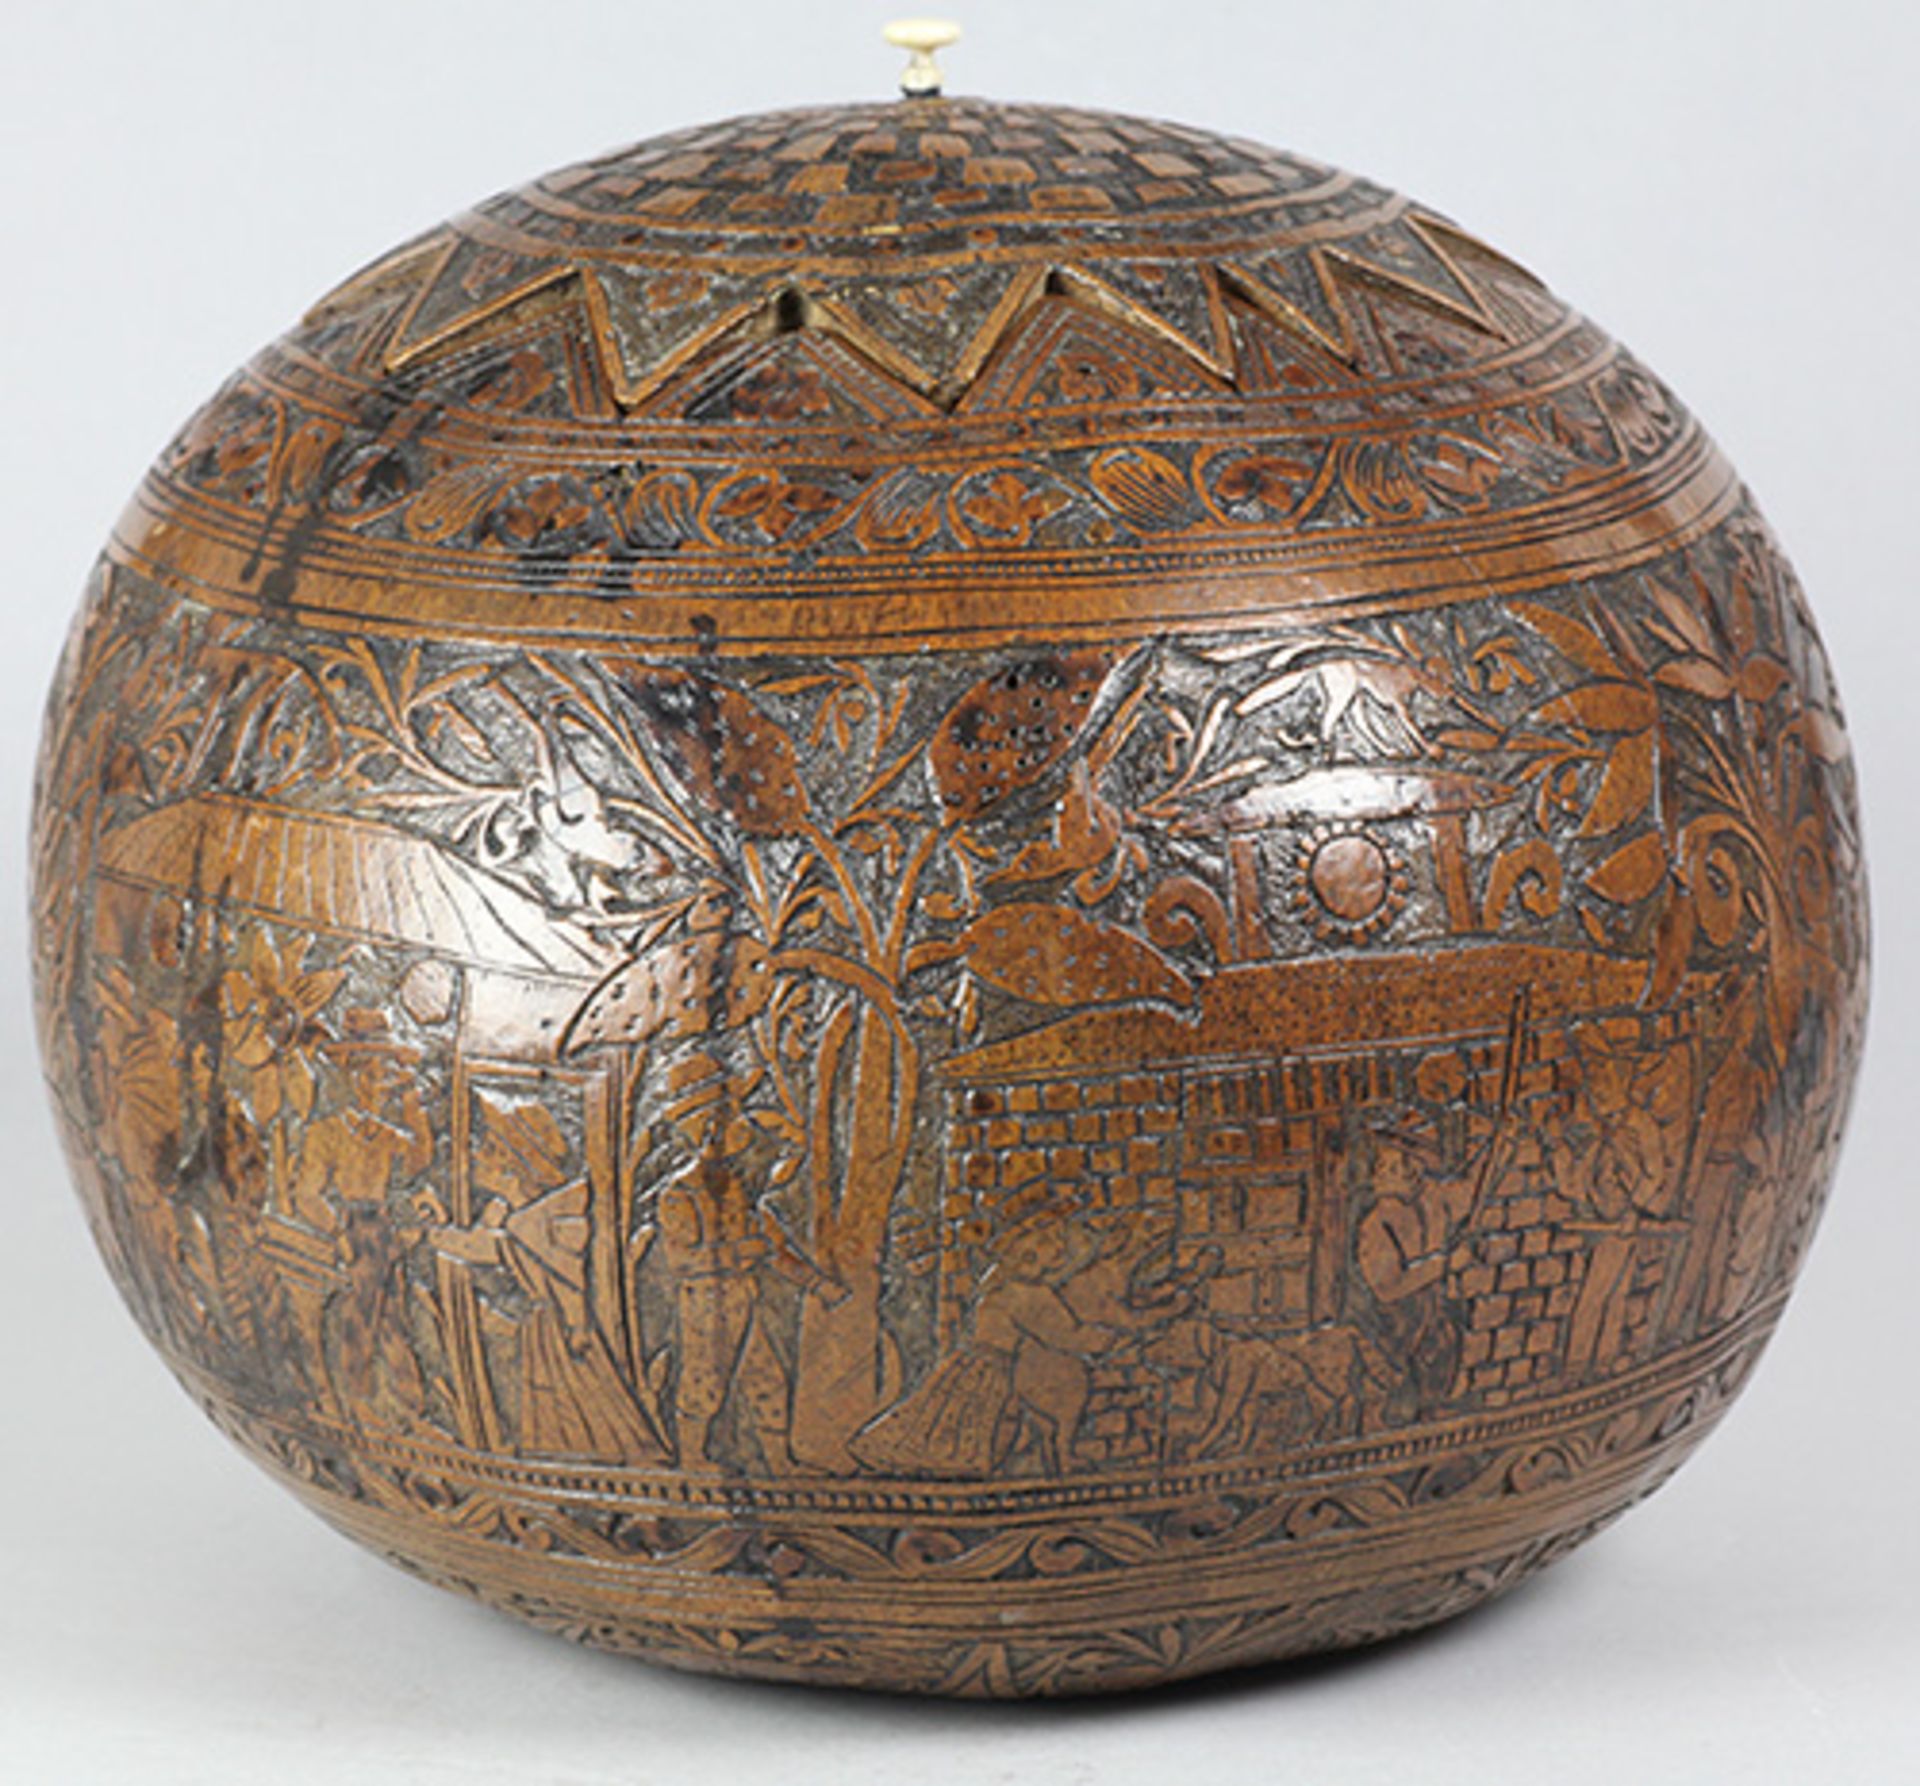 MUSEUM QUALITY HAND CARVED GOURD CONTAINER C.1800 - Image 3 of 11